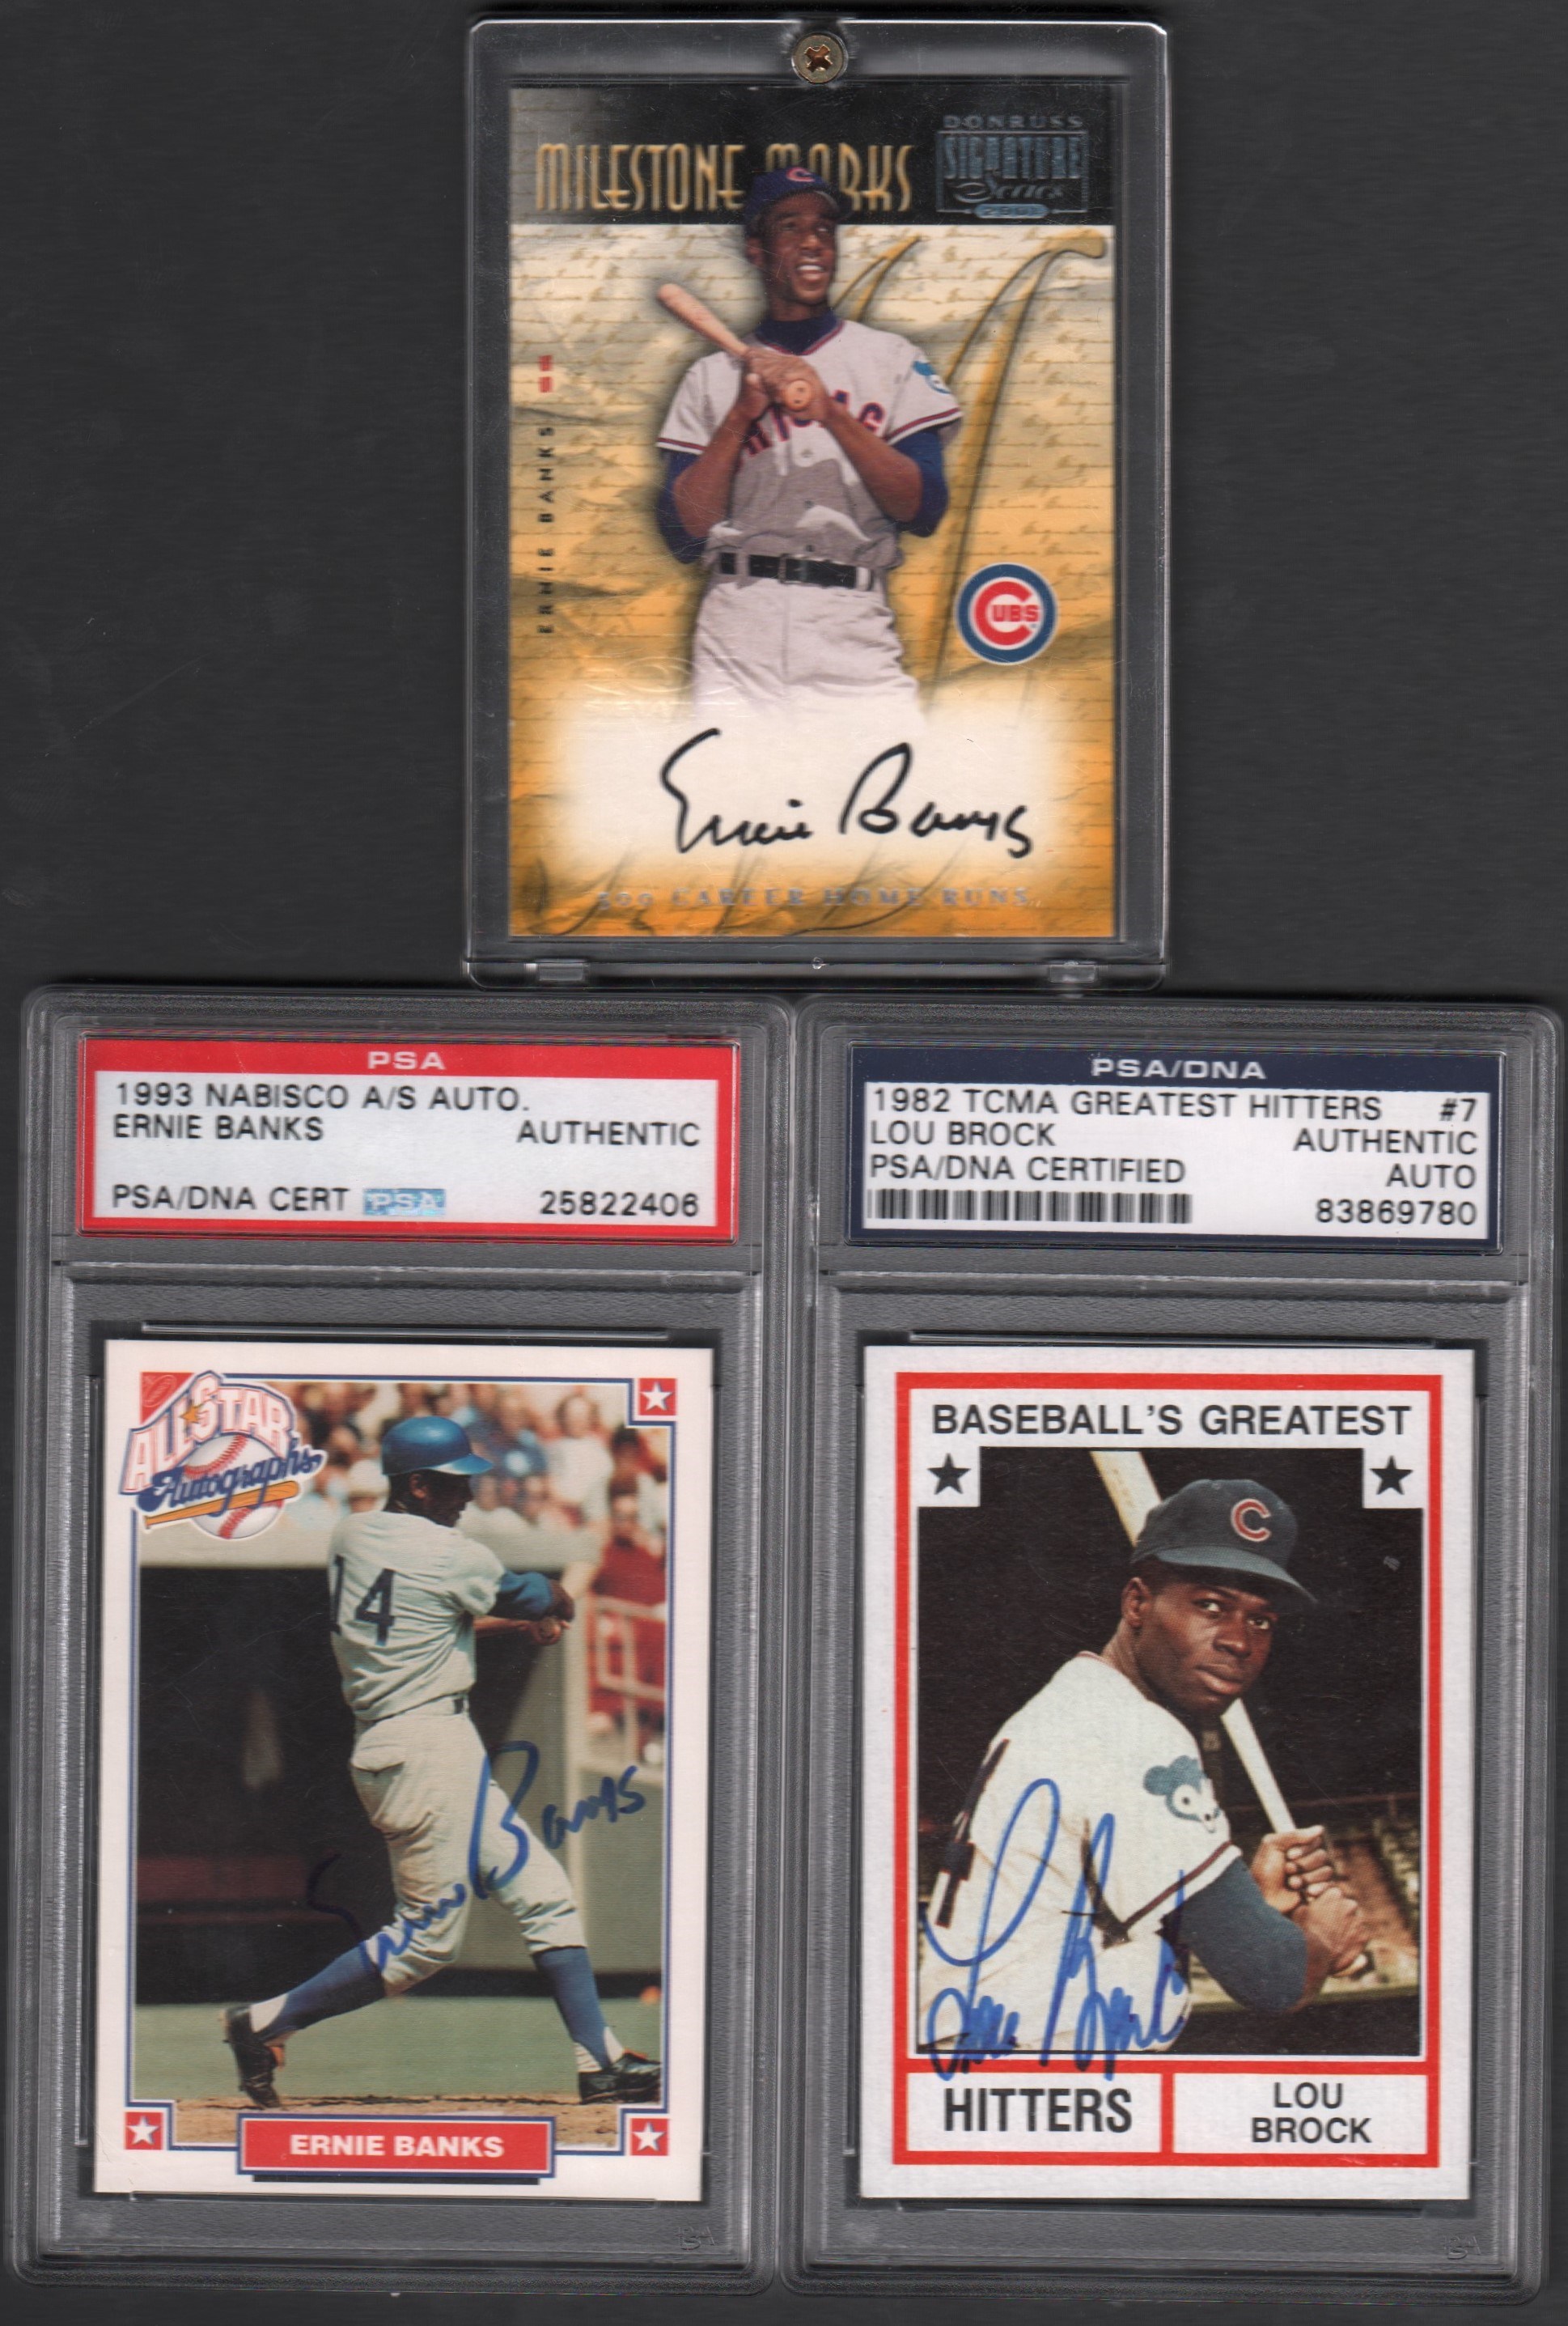 Autographs Baseball - 1970s Signed Baseball Card Collection with Ernie Banks